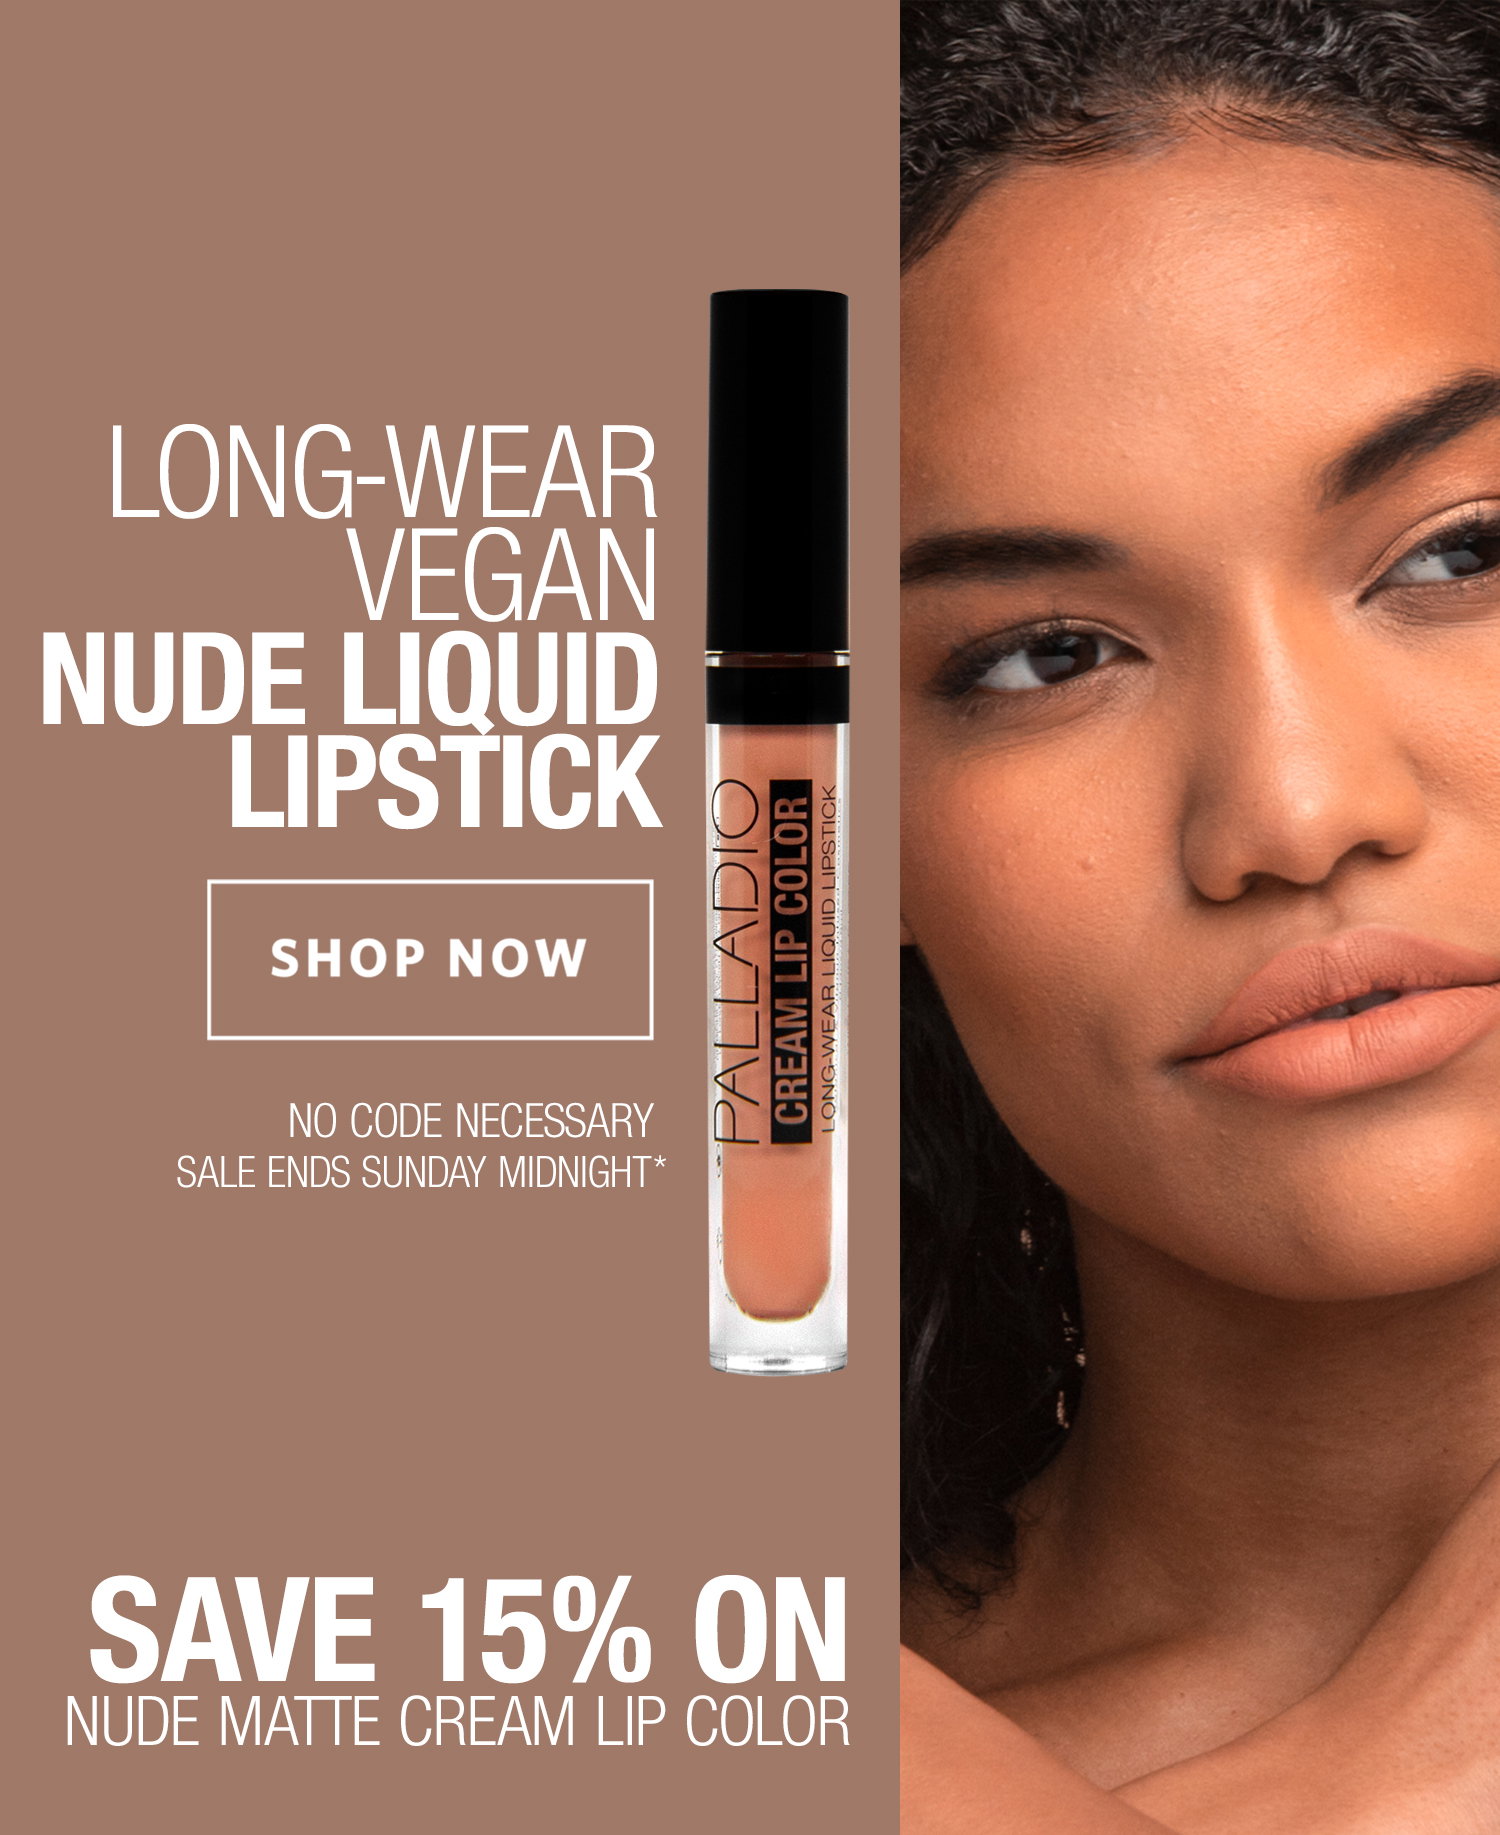 Palladio Beauty: Nude Sale Ends at Midnight